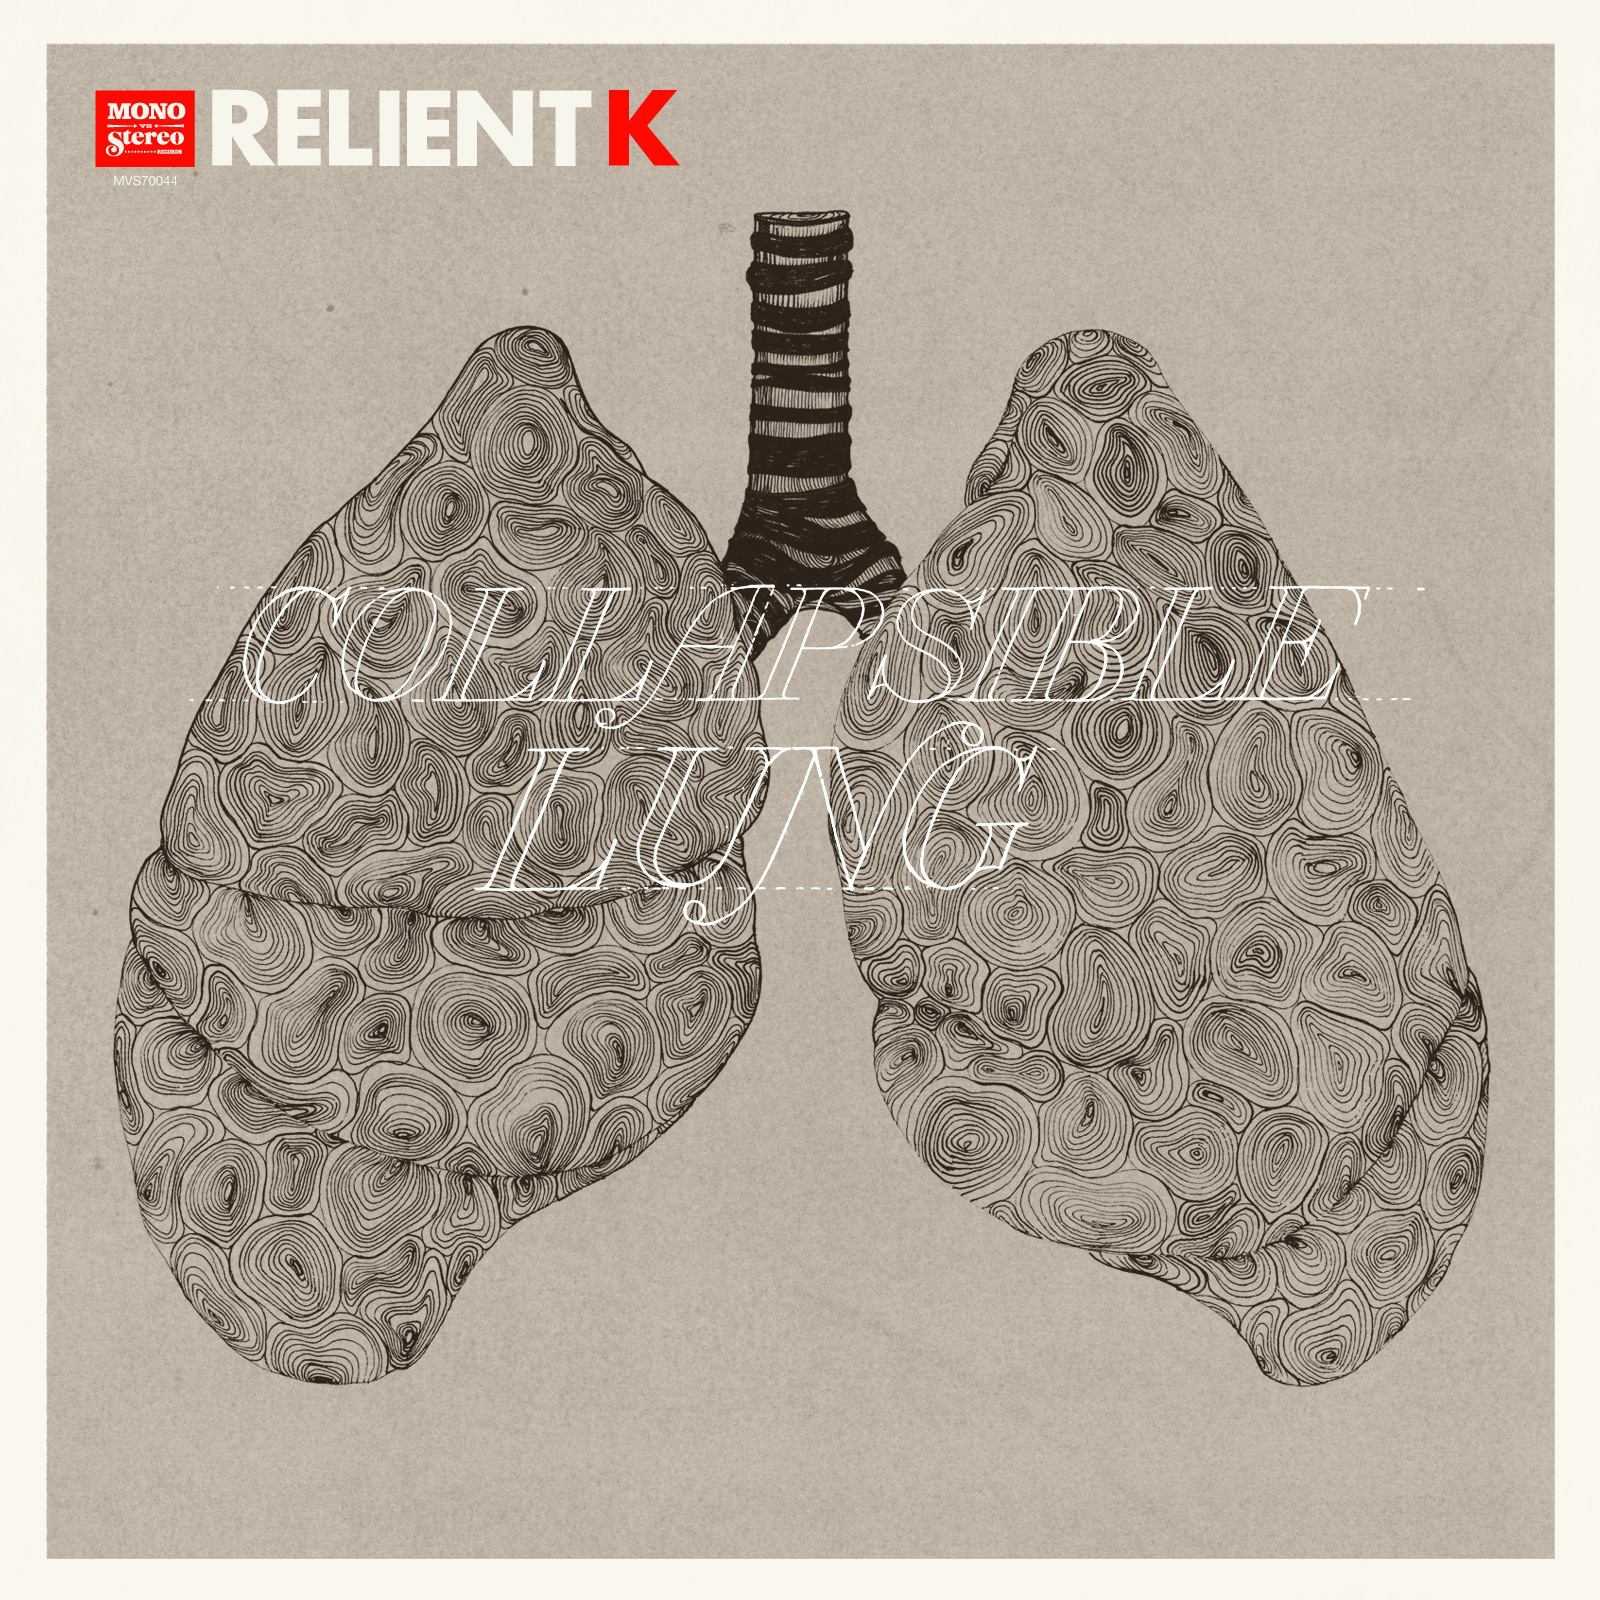 News Added May 29, 2013 Relient K have announced that they will release their first full-length album in four years, Collapsible Lung on July 2 via Mono Vs. Stereo. Fans can preorder the album now via iTunes, and will immediately receive a download of "That's My Jam," a collaboration with Owl City that is an […]